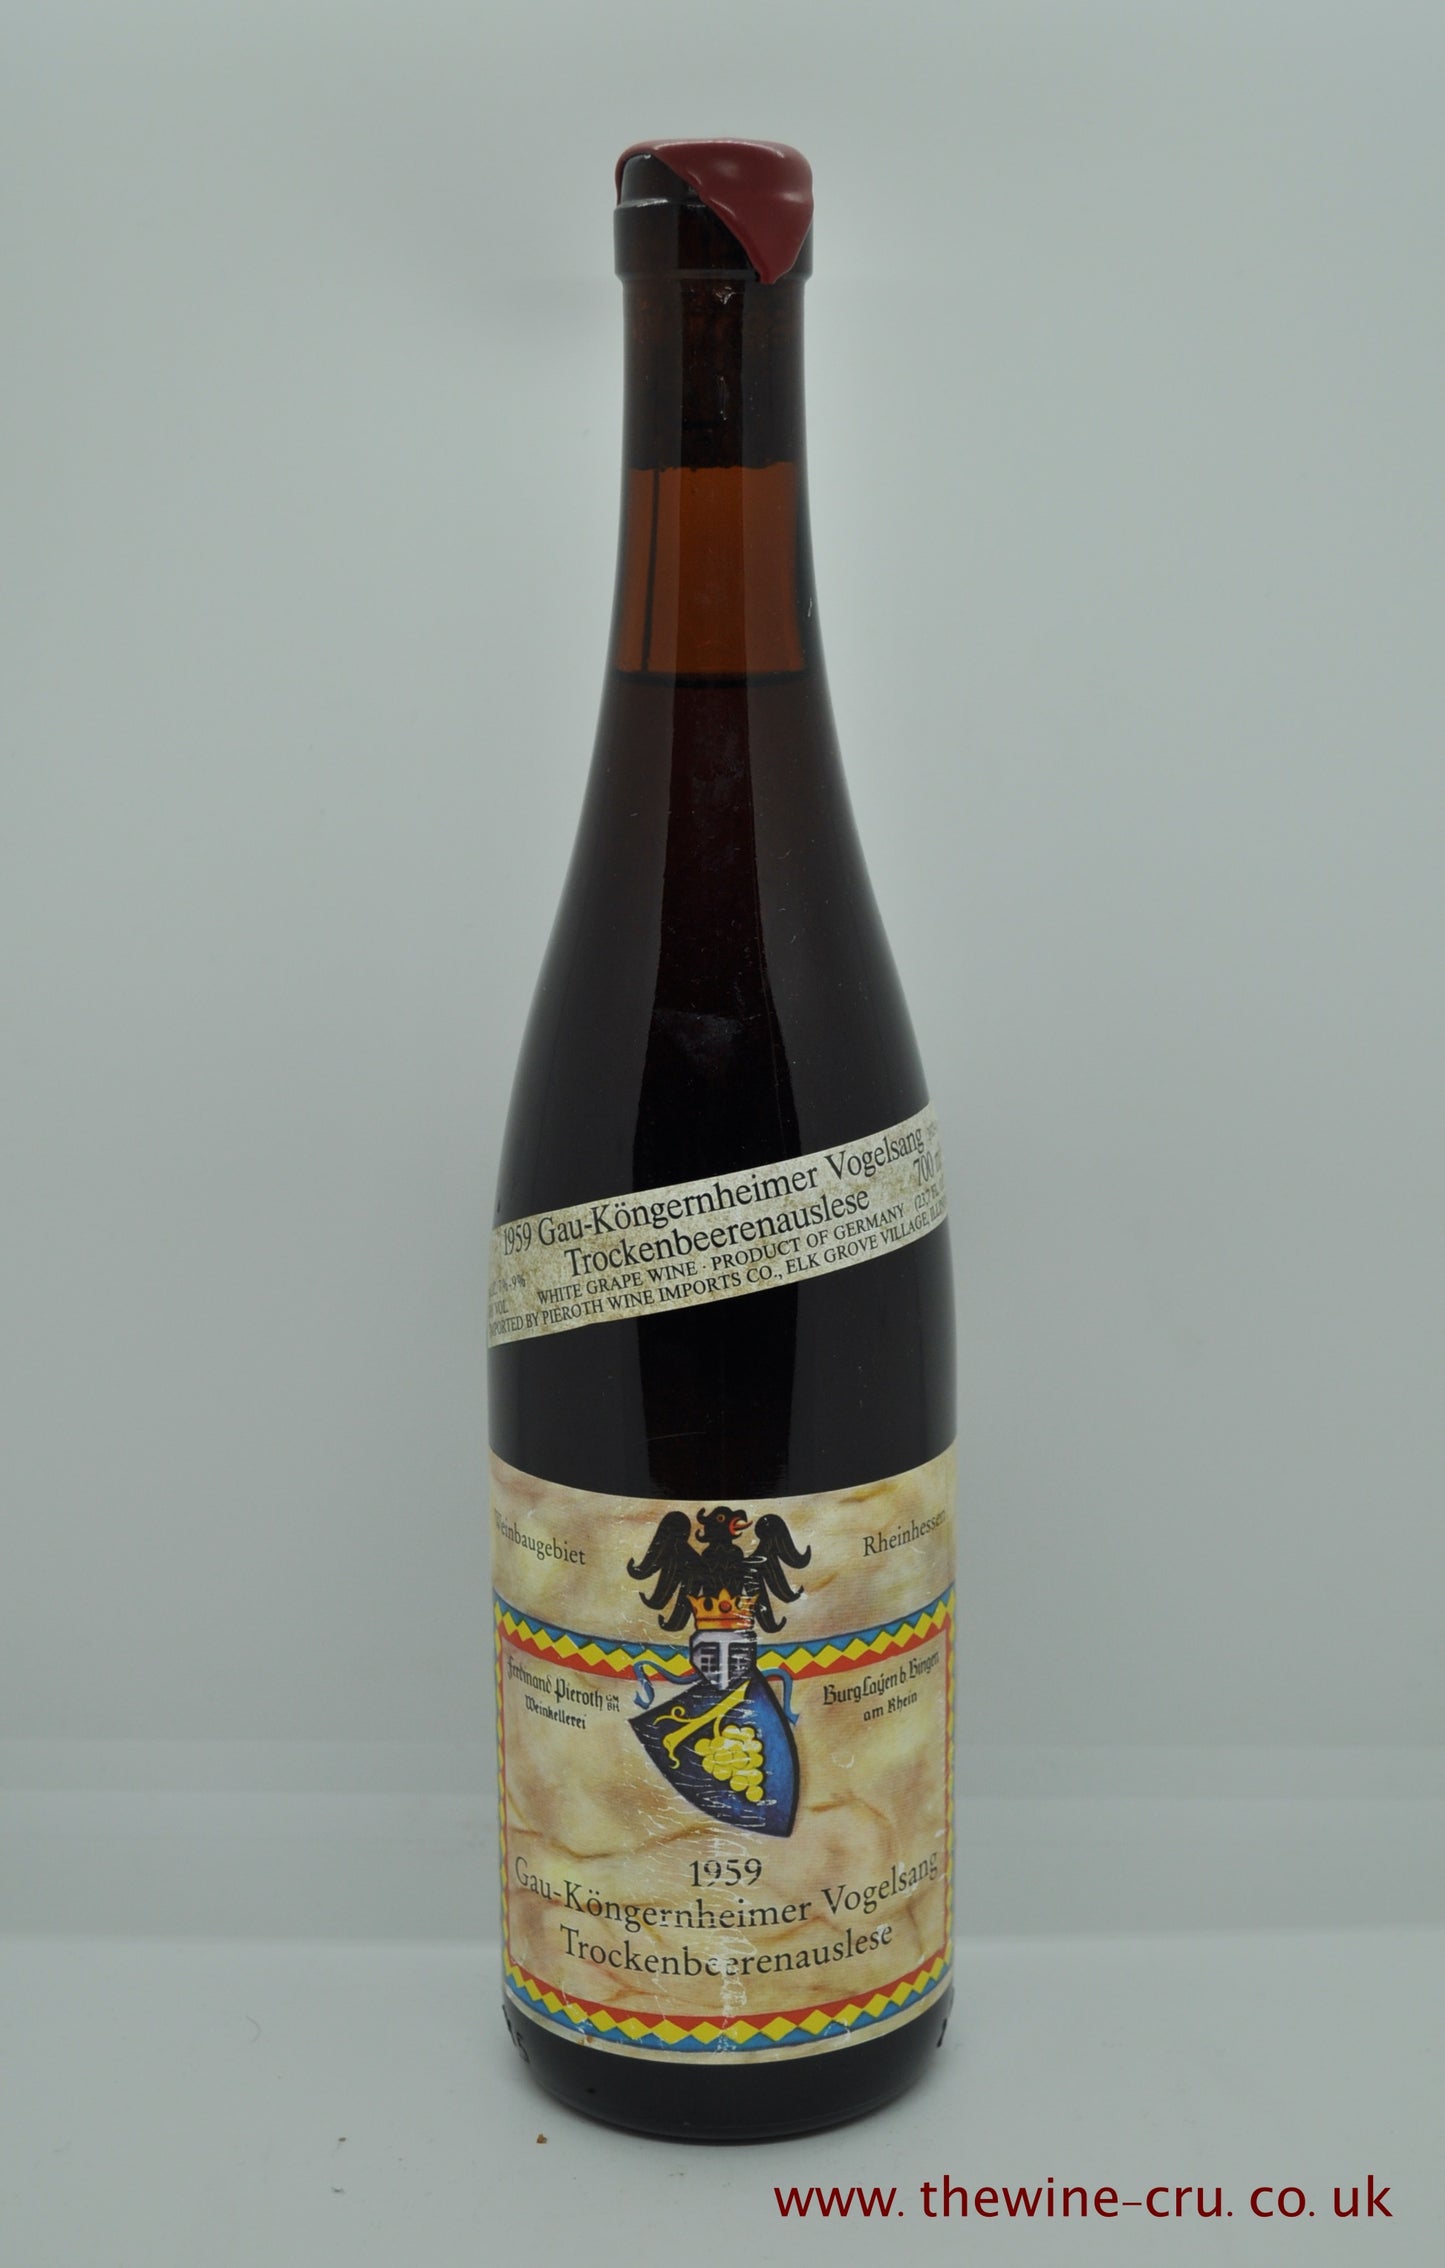 1959 vintage sweet white wine. Gau - Kongernheimer Vogelsang Trockenbeerenauslese 1959. Germany. immediate delivery. Free local delivery. Gift wrapping available.